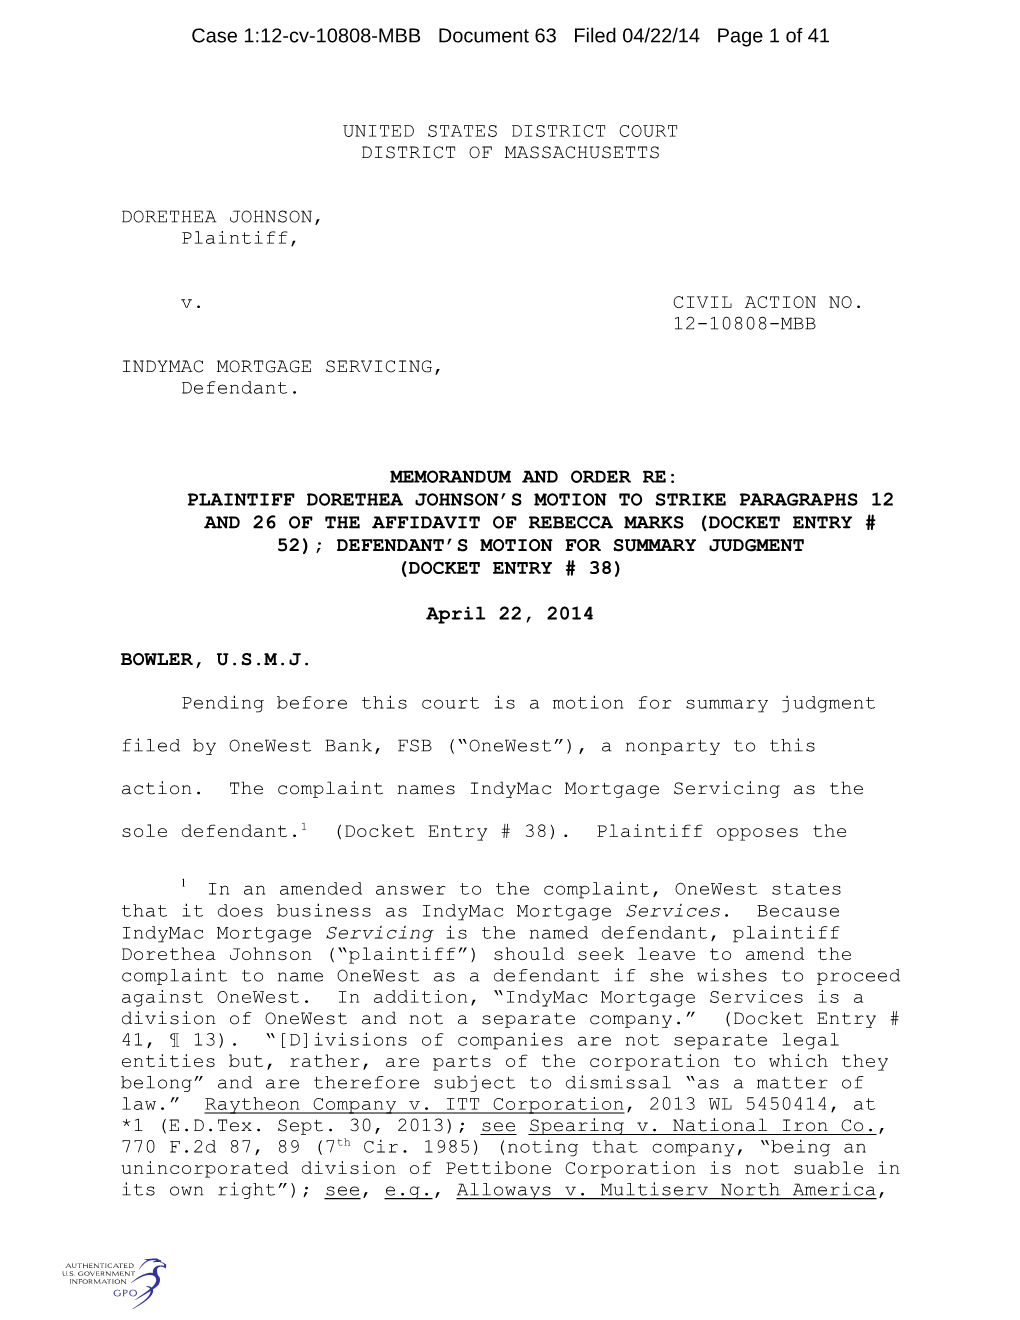 Case 1:12-Cv-10808-MBB Document 63 Filed 04/22/14 Page 1 of 41